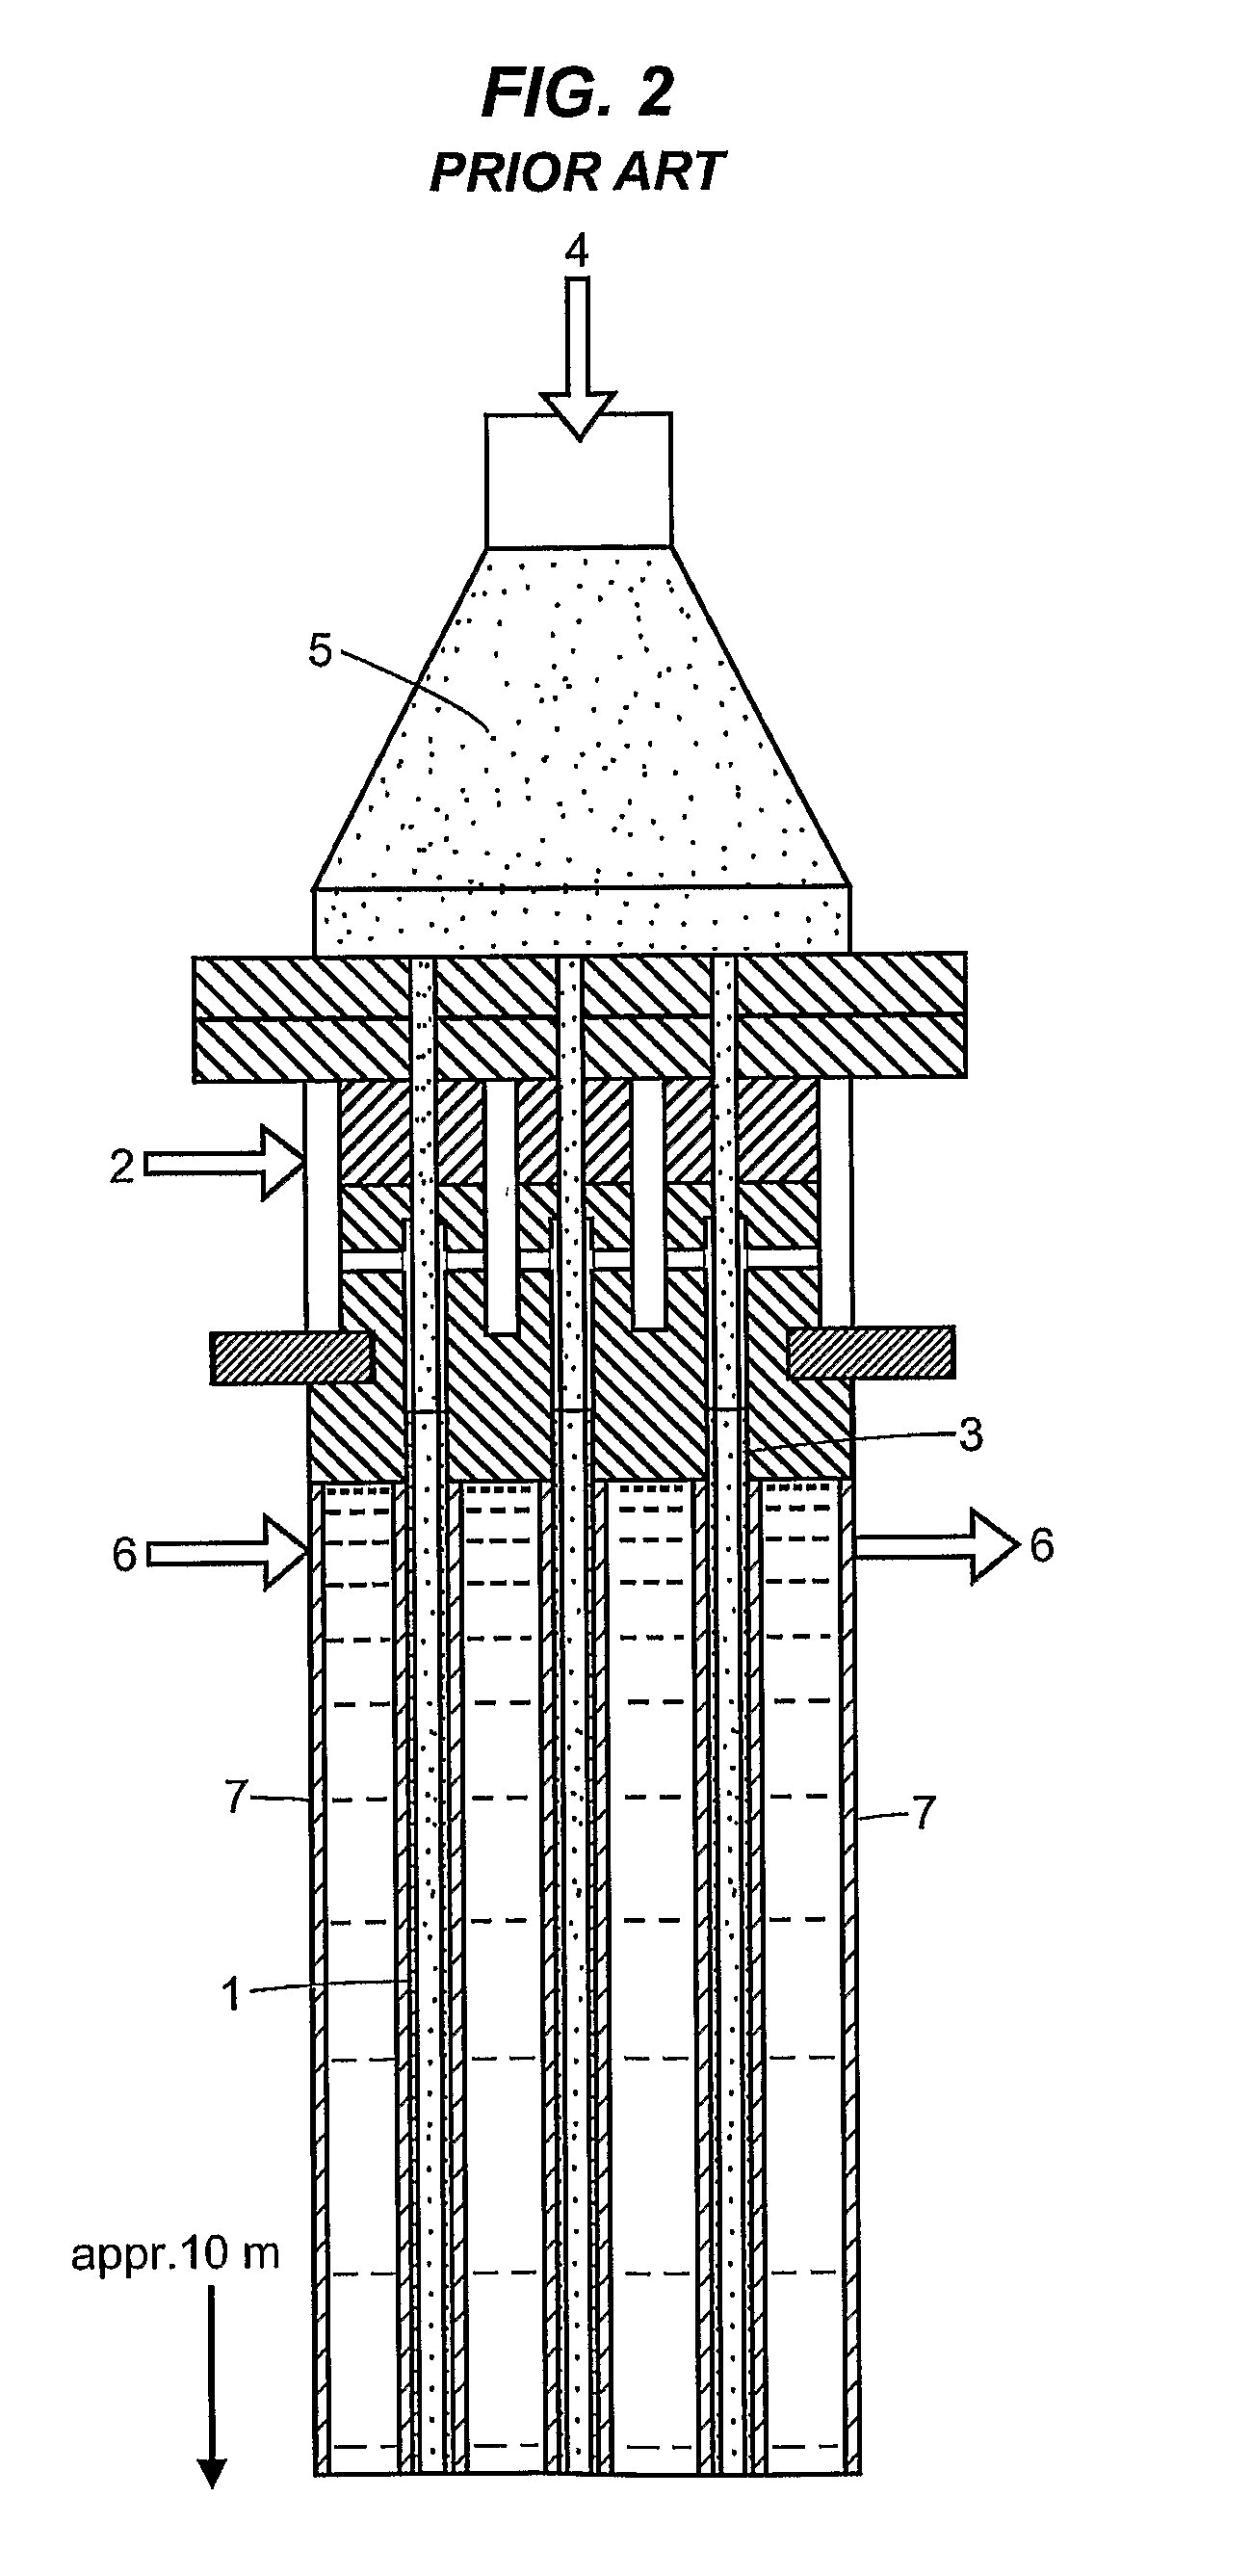 Method and device for the sulfonation or sulfation of sulfonatable or sulfatable organic substances and for performing faster, strongly exothermic gas/liquid reactions